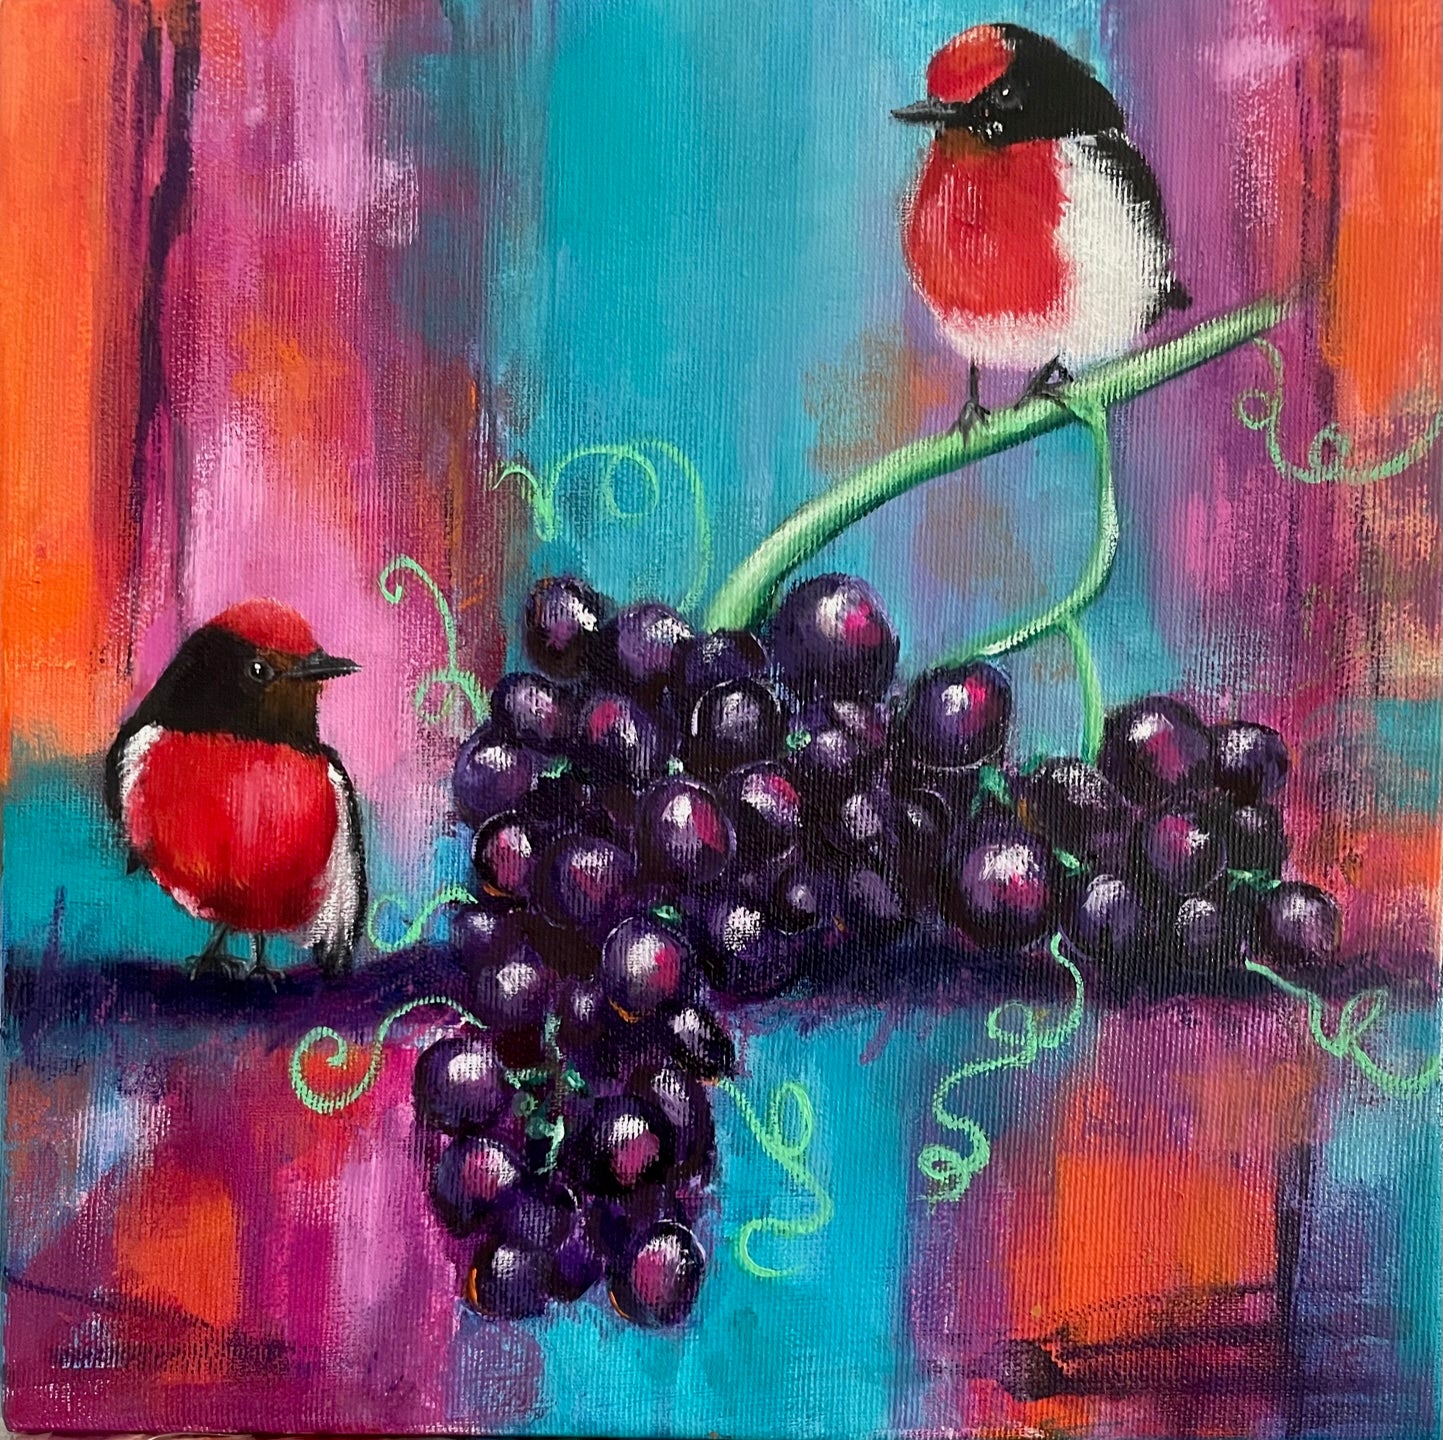 Colourful Mixed media painting of red robins and a bunch of red grapes on colourful abstract background.